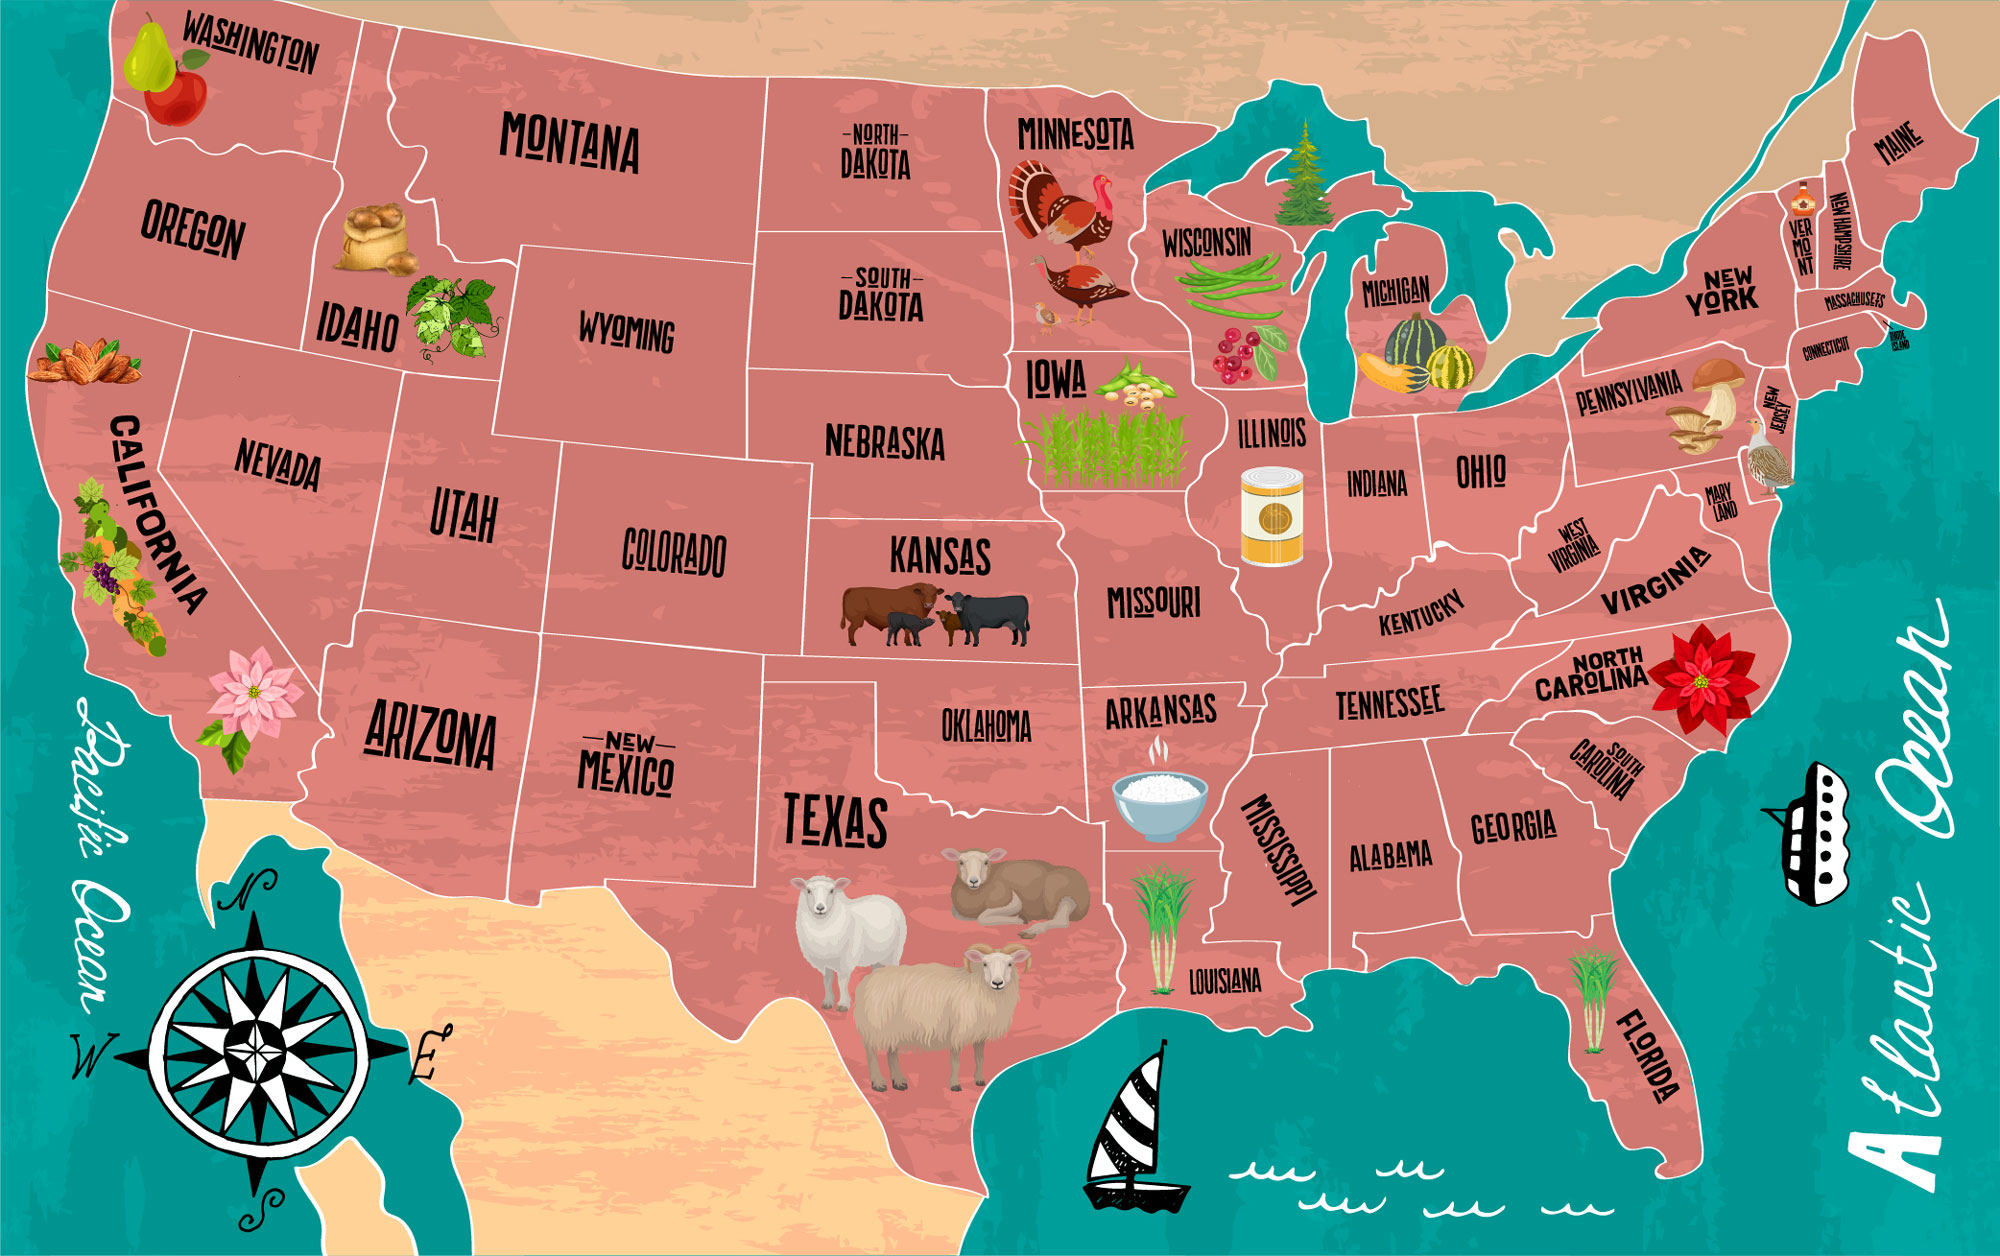 A map of the United States with select states’ number one crop